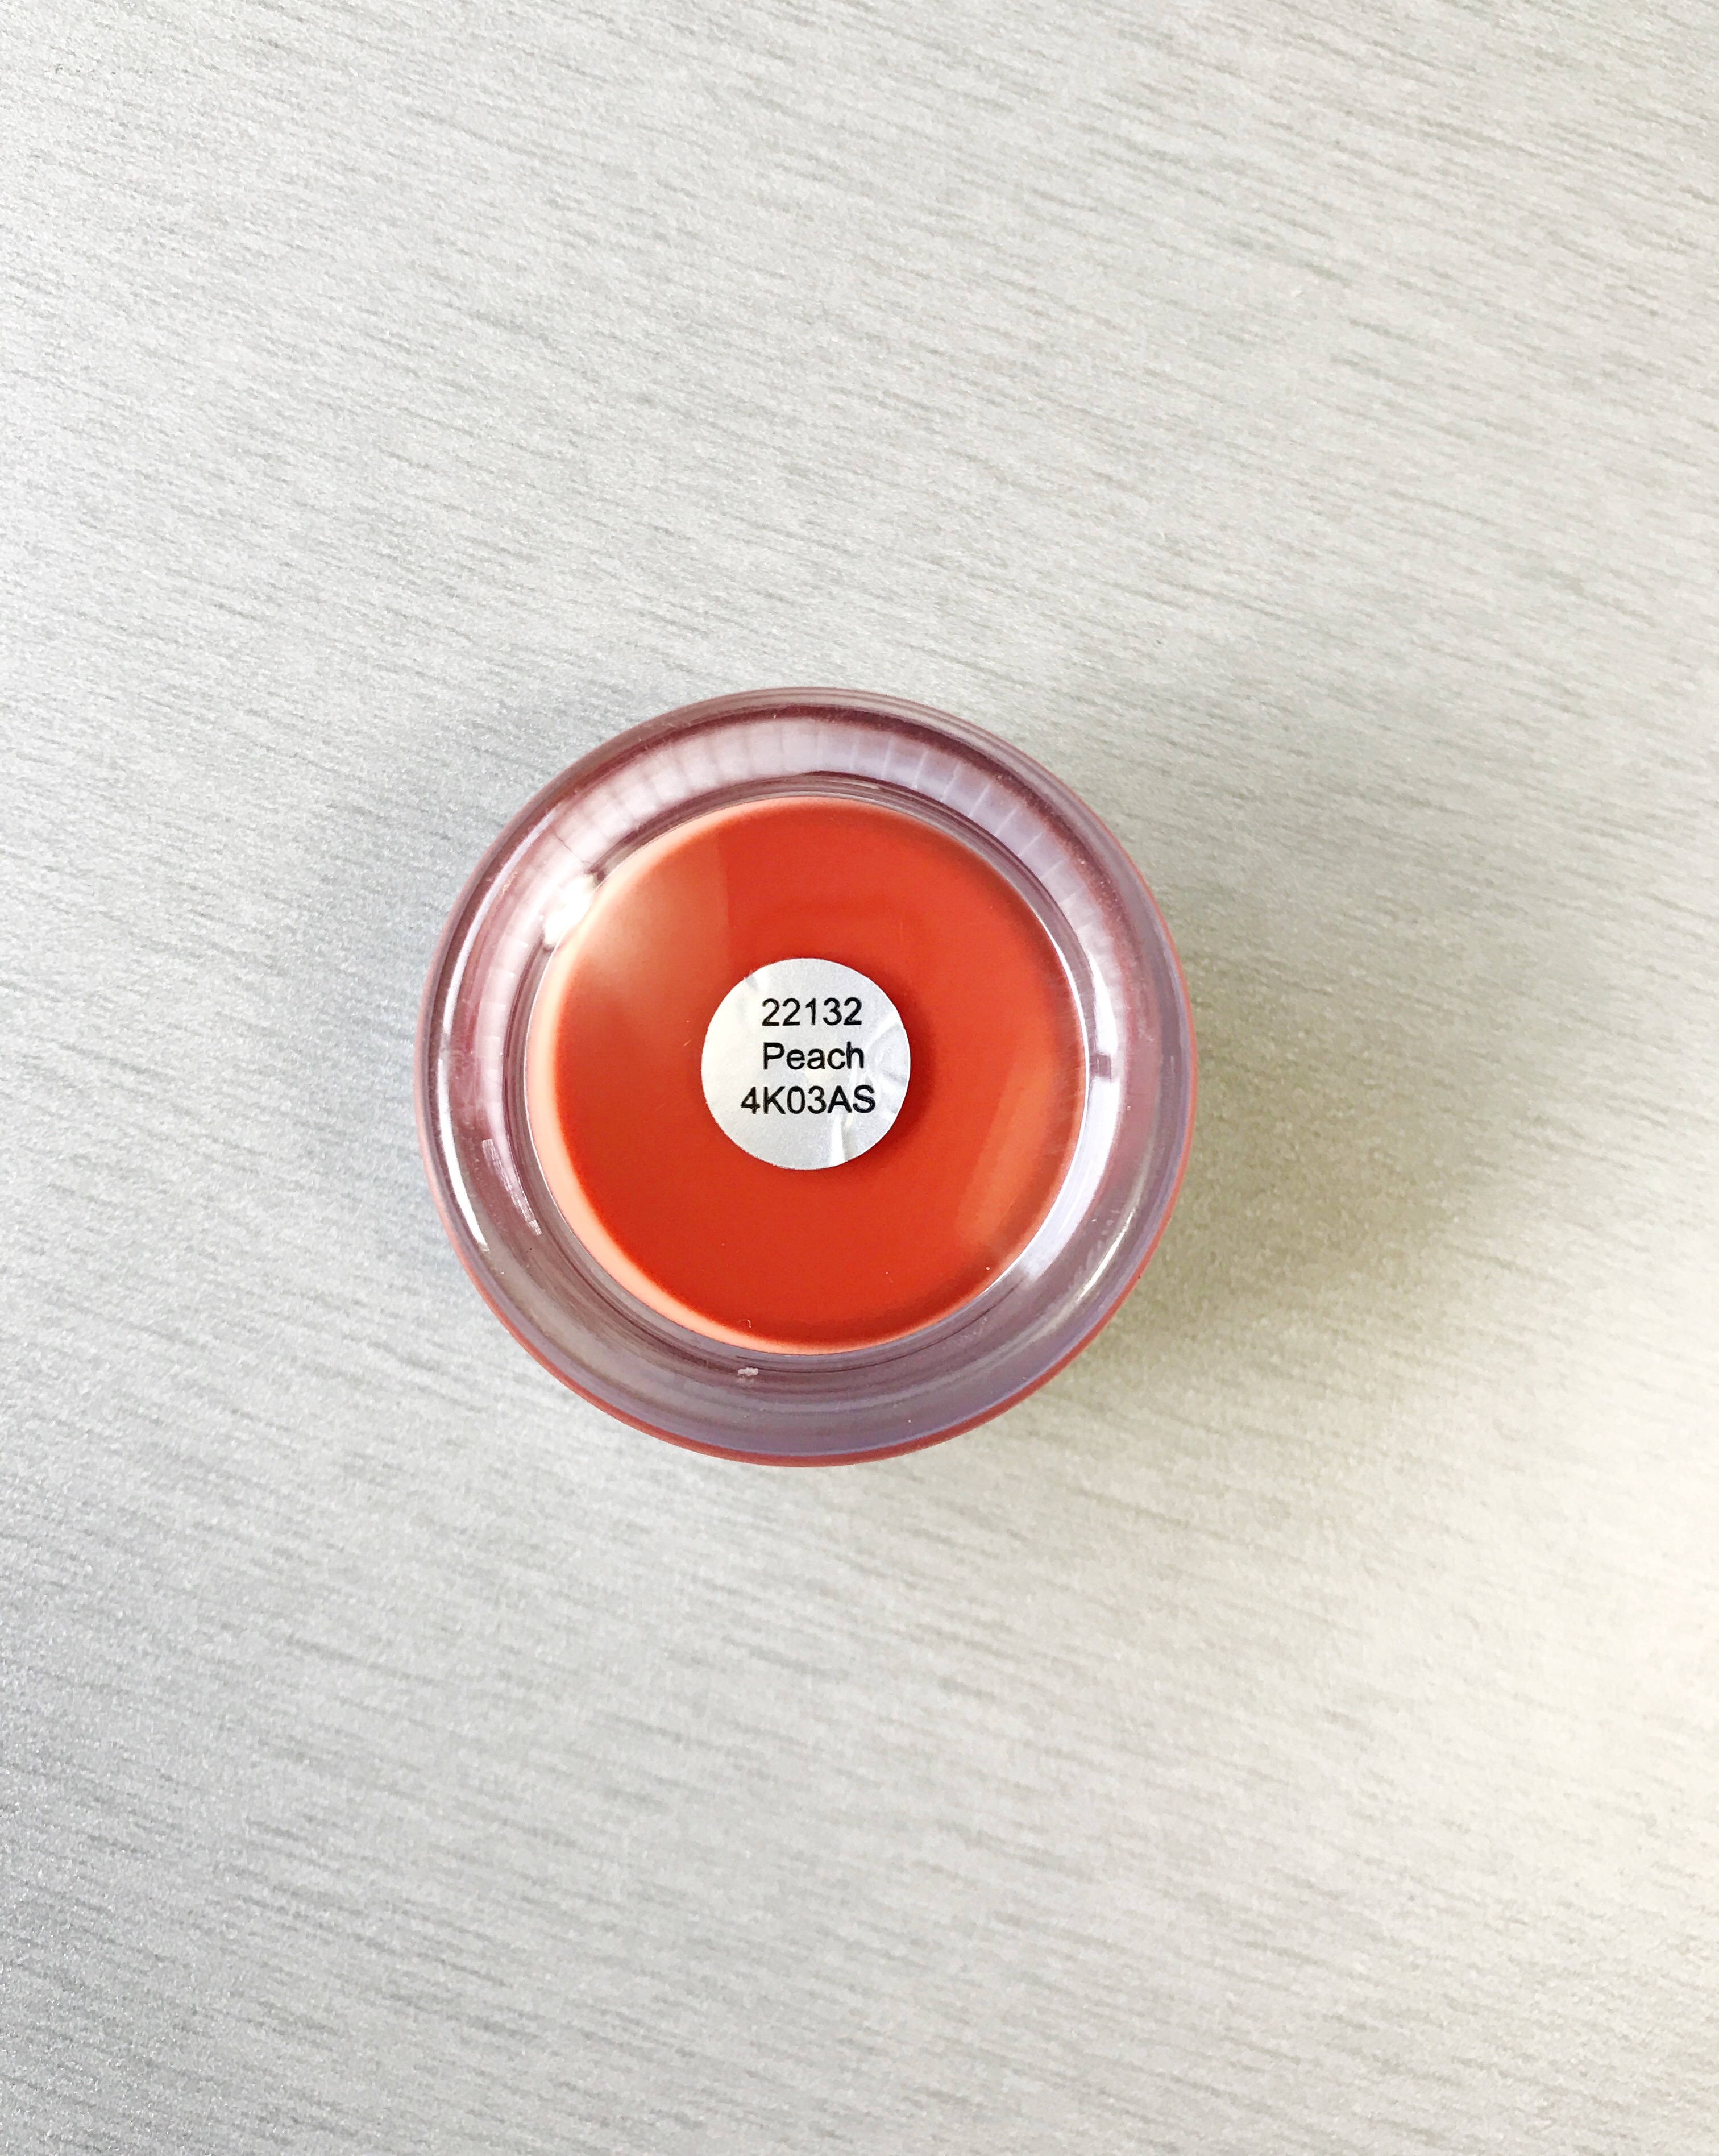 Tinted Lip Balm in the Color Peach